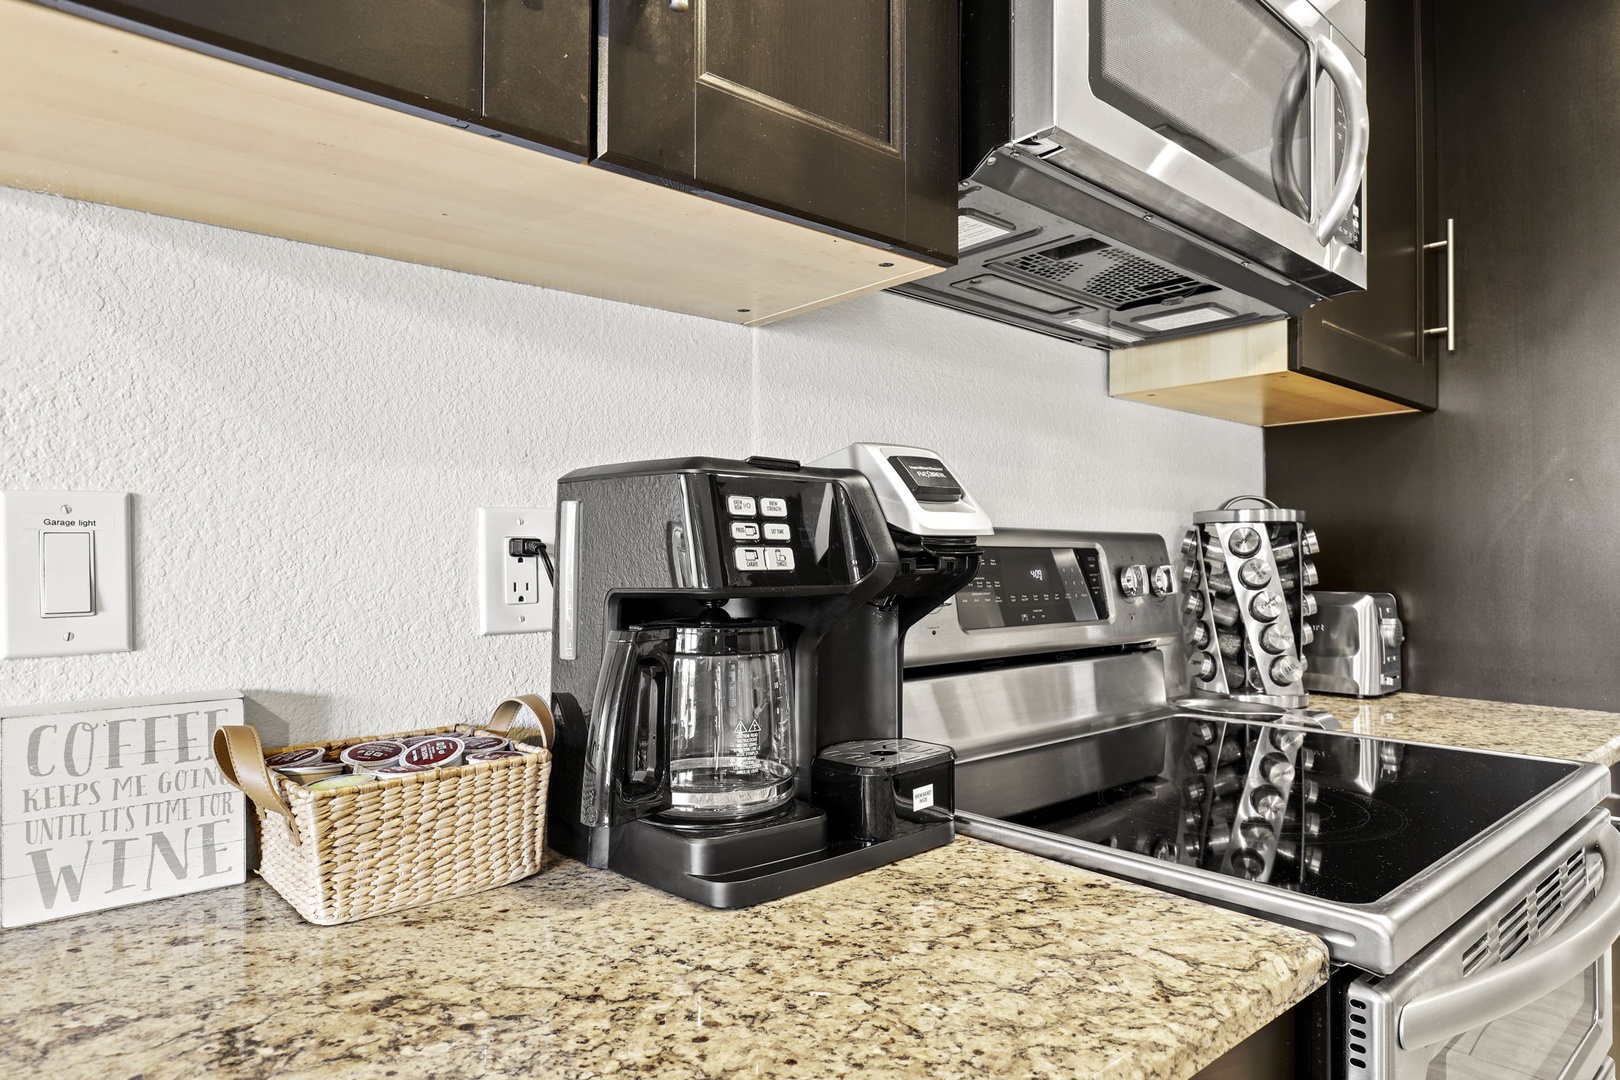 Modern kitchen outfitted with stainless steel appliances and everything you need to cook up all your favorites - Pots, Pans, Utensils, Spice Rack, Toaster, Kettle, Blender, Drip Coffee Maker, Filtered Water, Ice Maker.